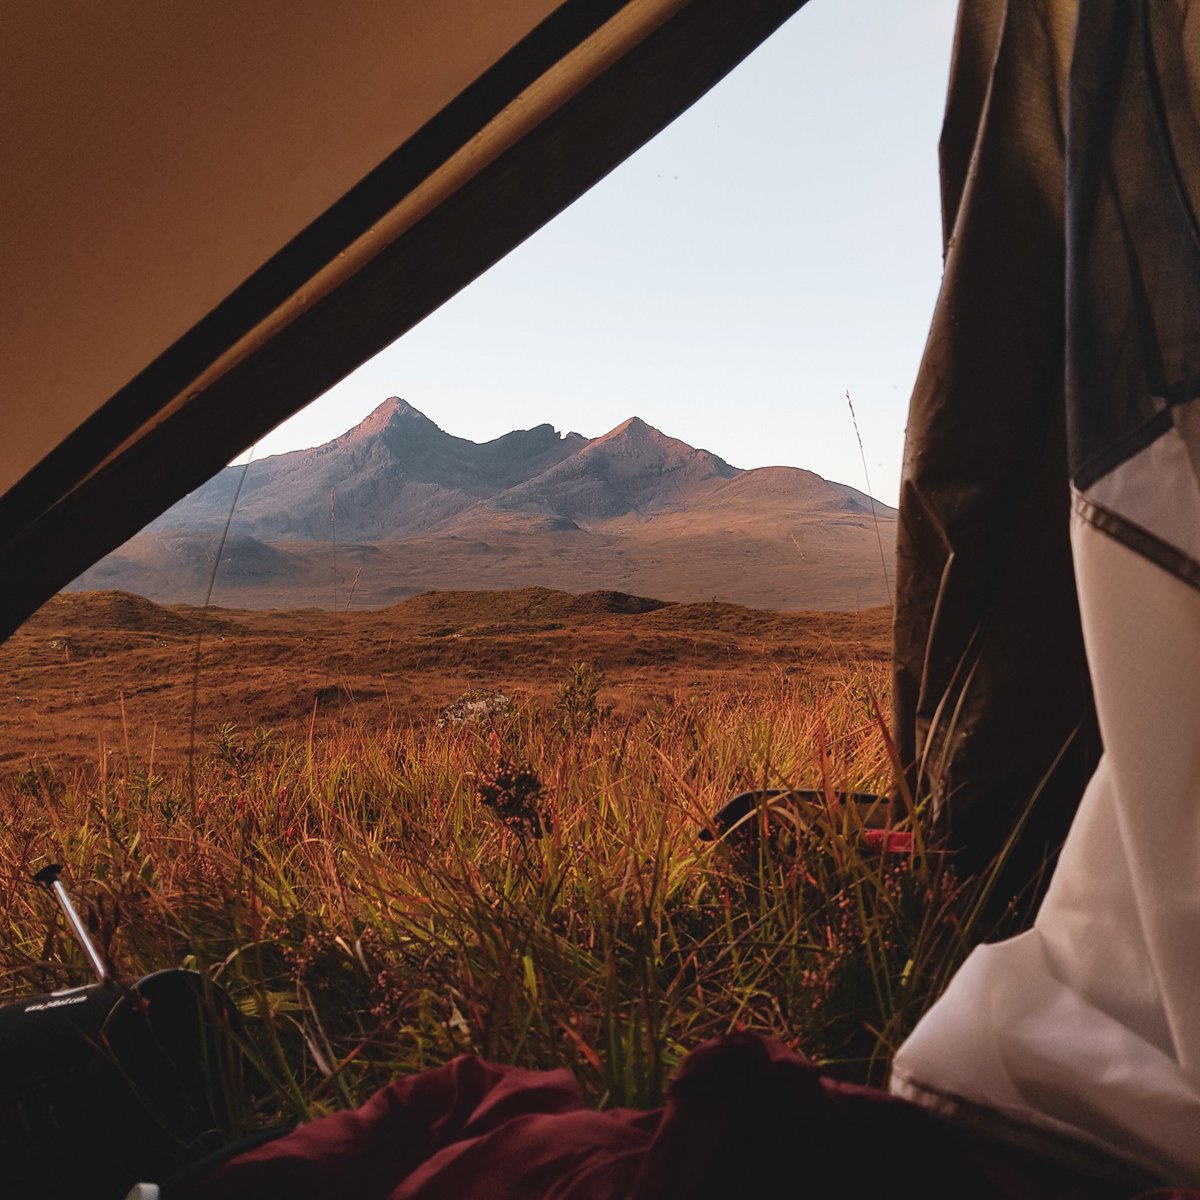 Waking up to the Cuillin. 

#TentViews #IsleofSkye